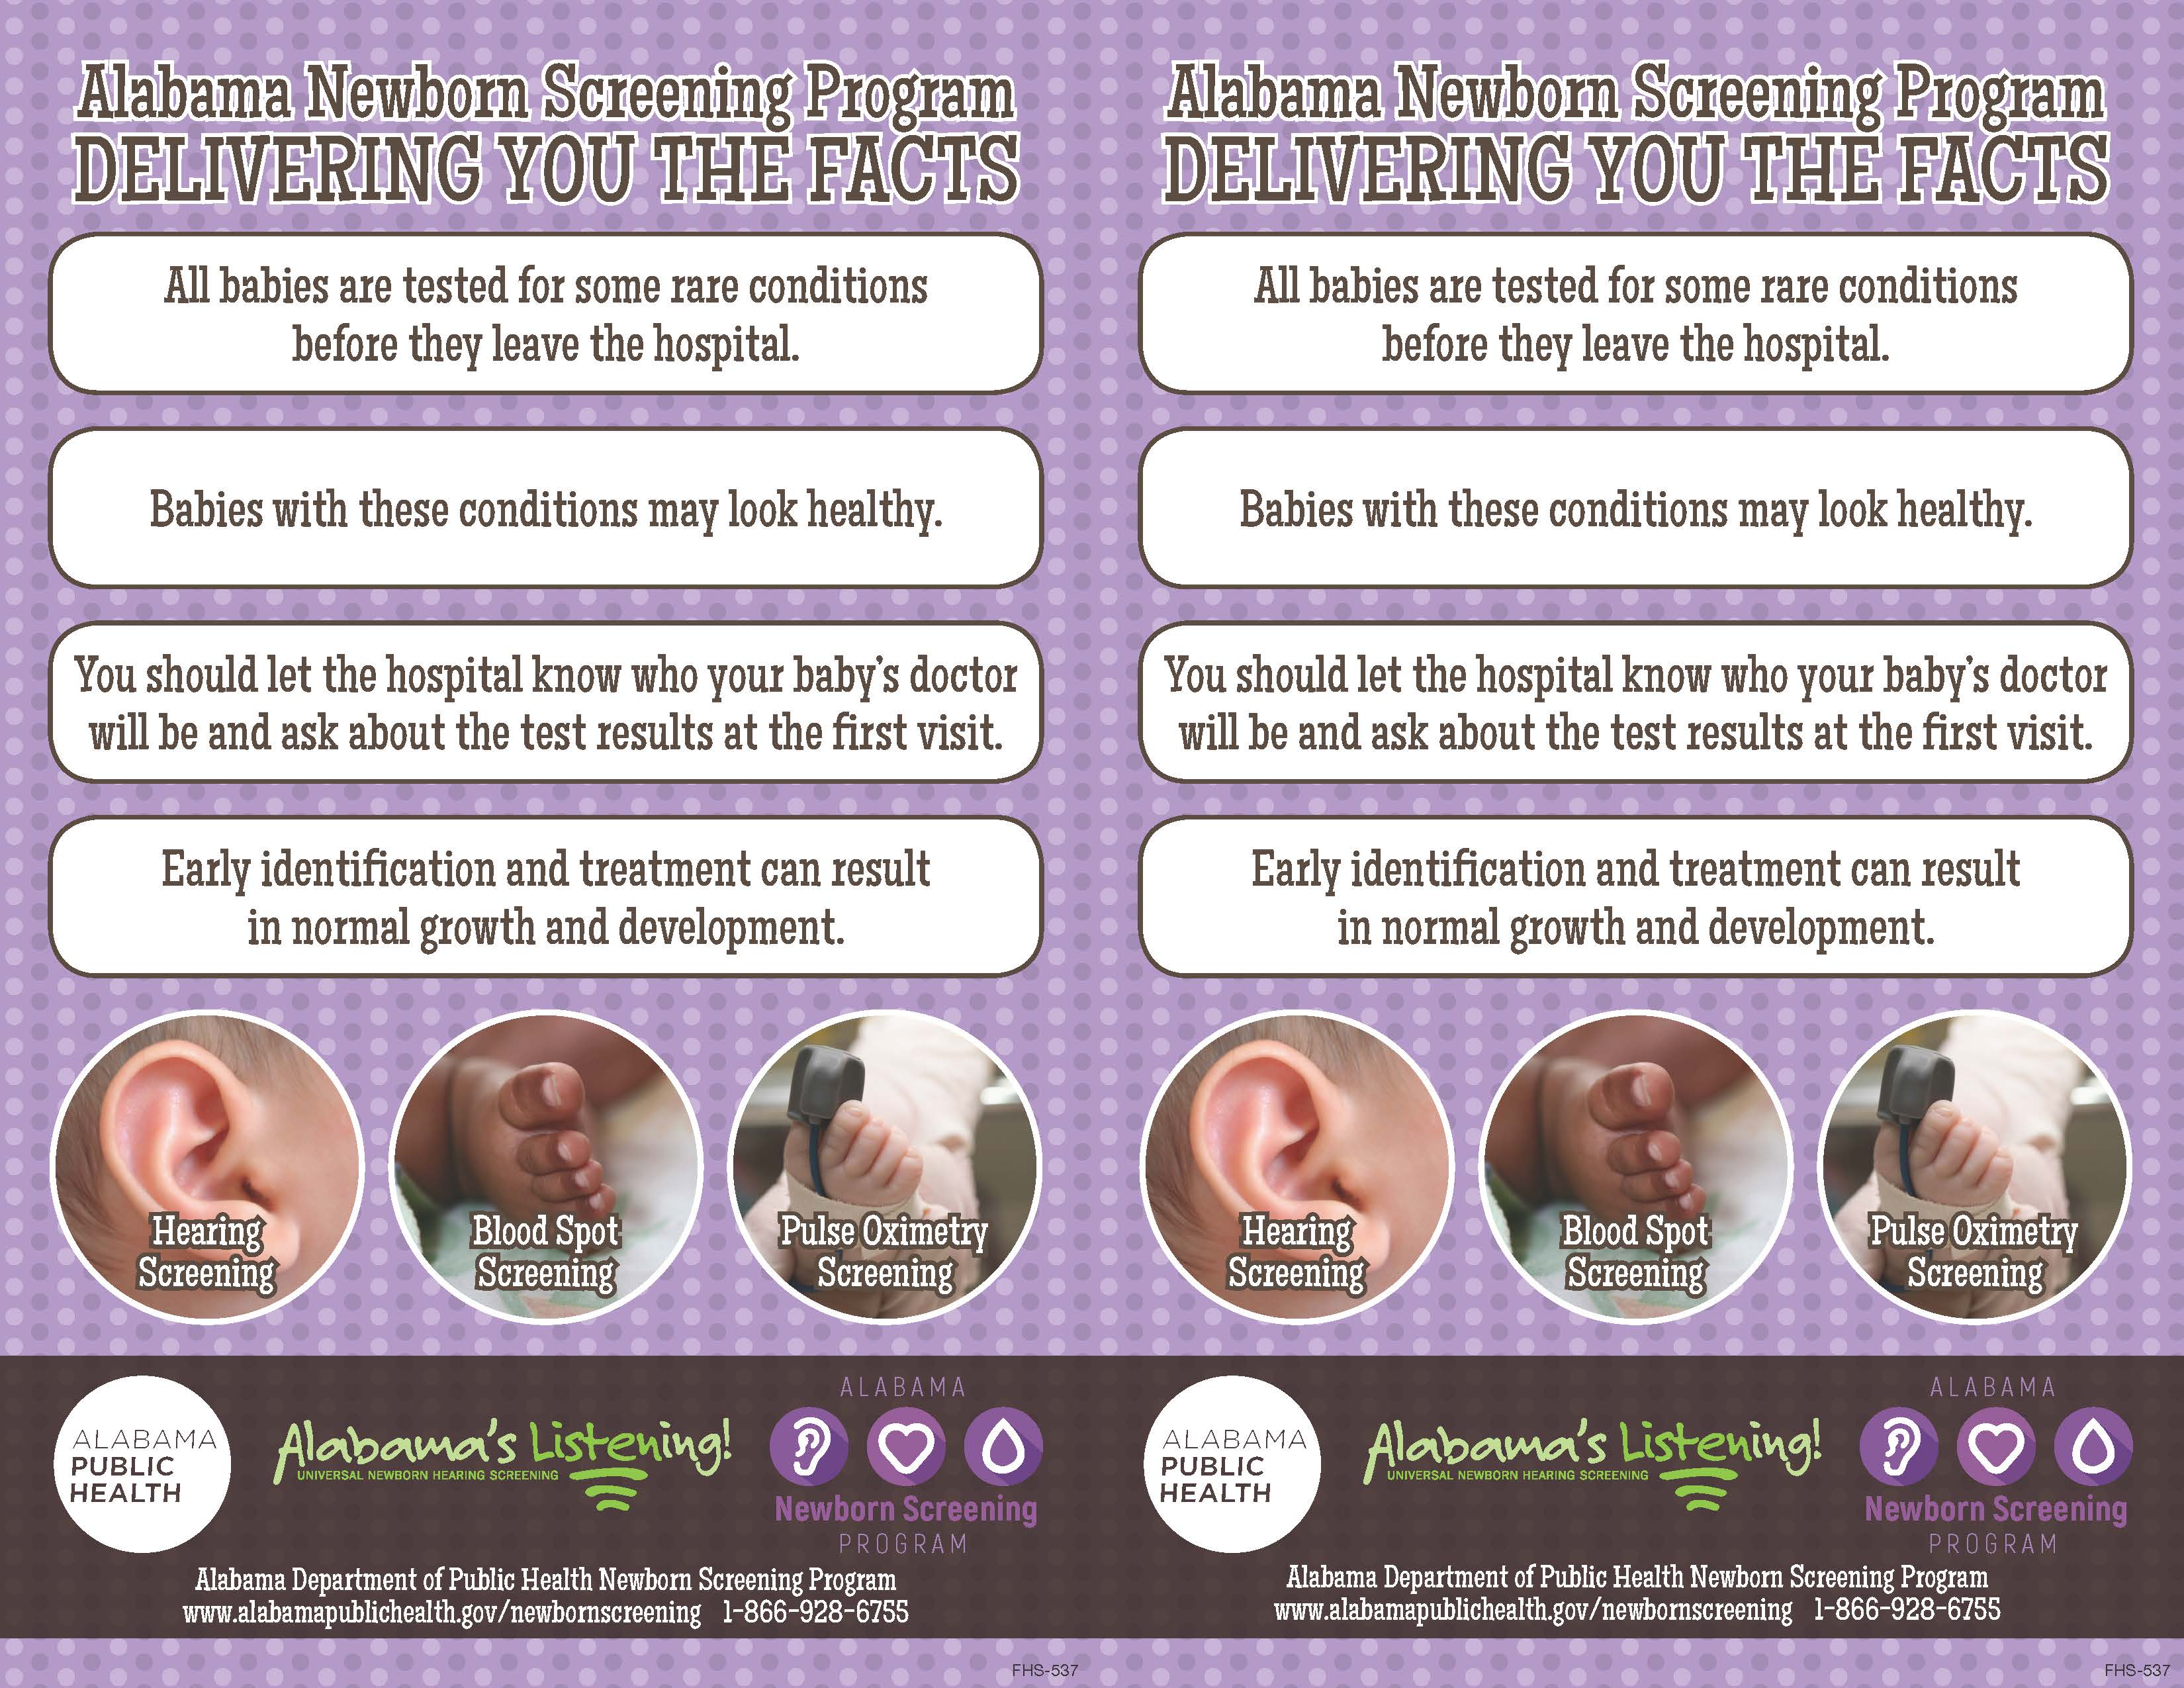 5x8 Card for Newborn Screening: Delivering You the Facts